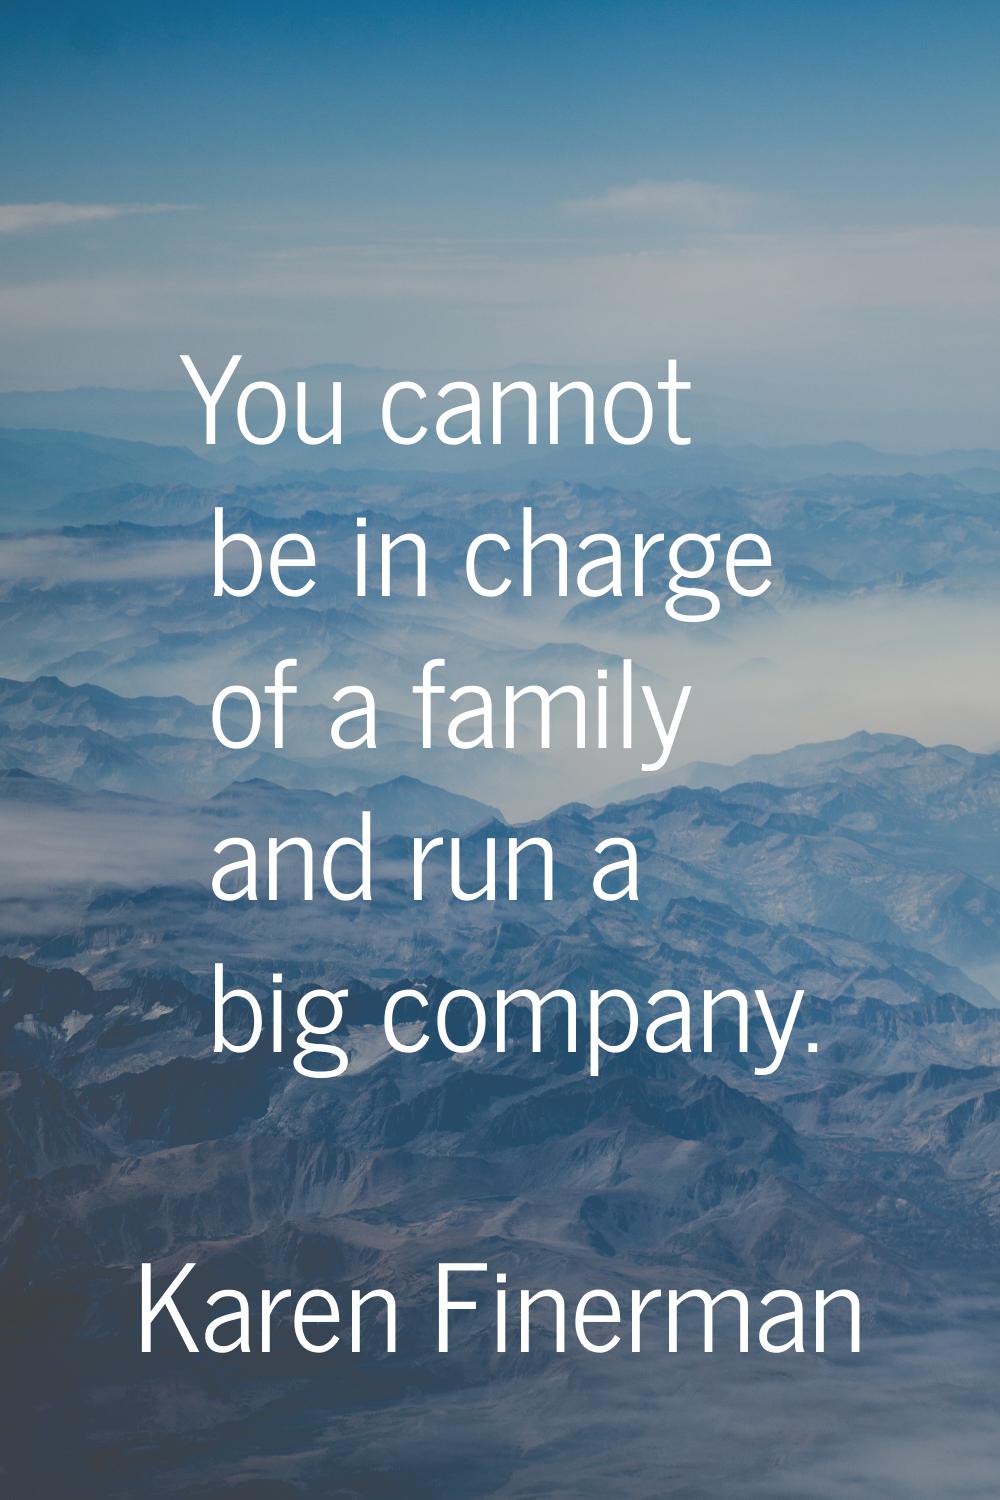 You cannot be in charge of a family and run a big company.